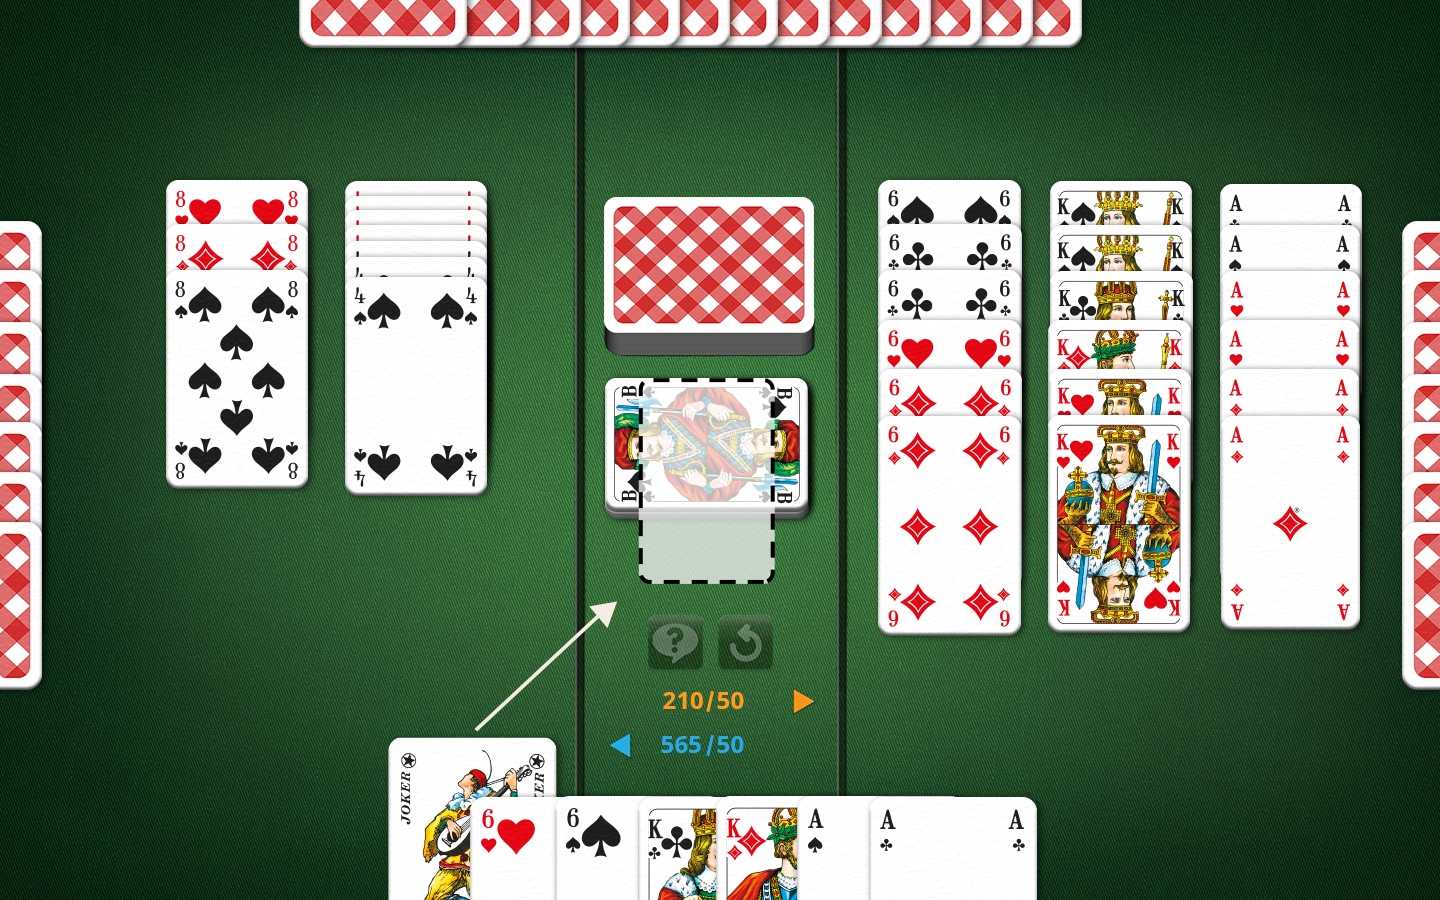 Canasta Playing Field With a Wild Card for Freezing the Discard Pile